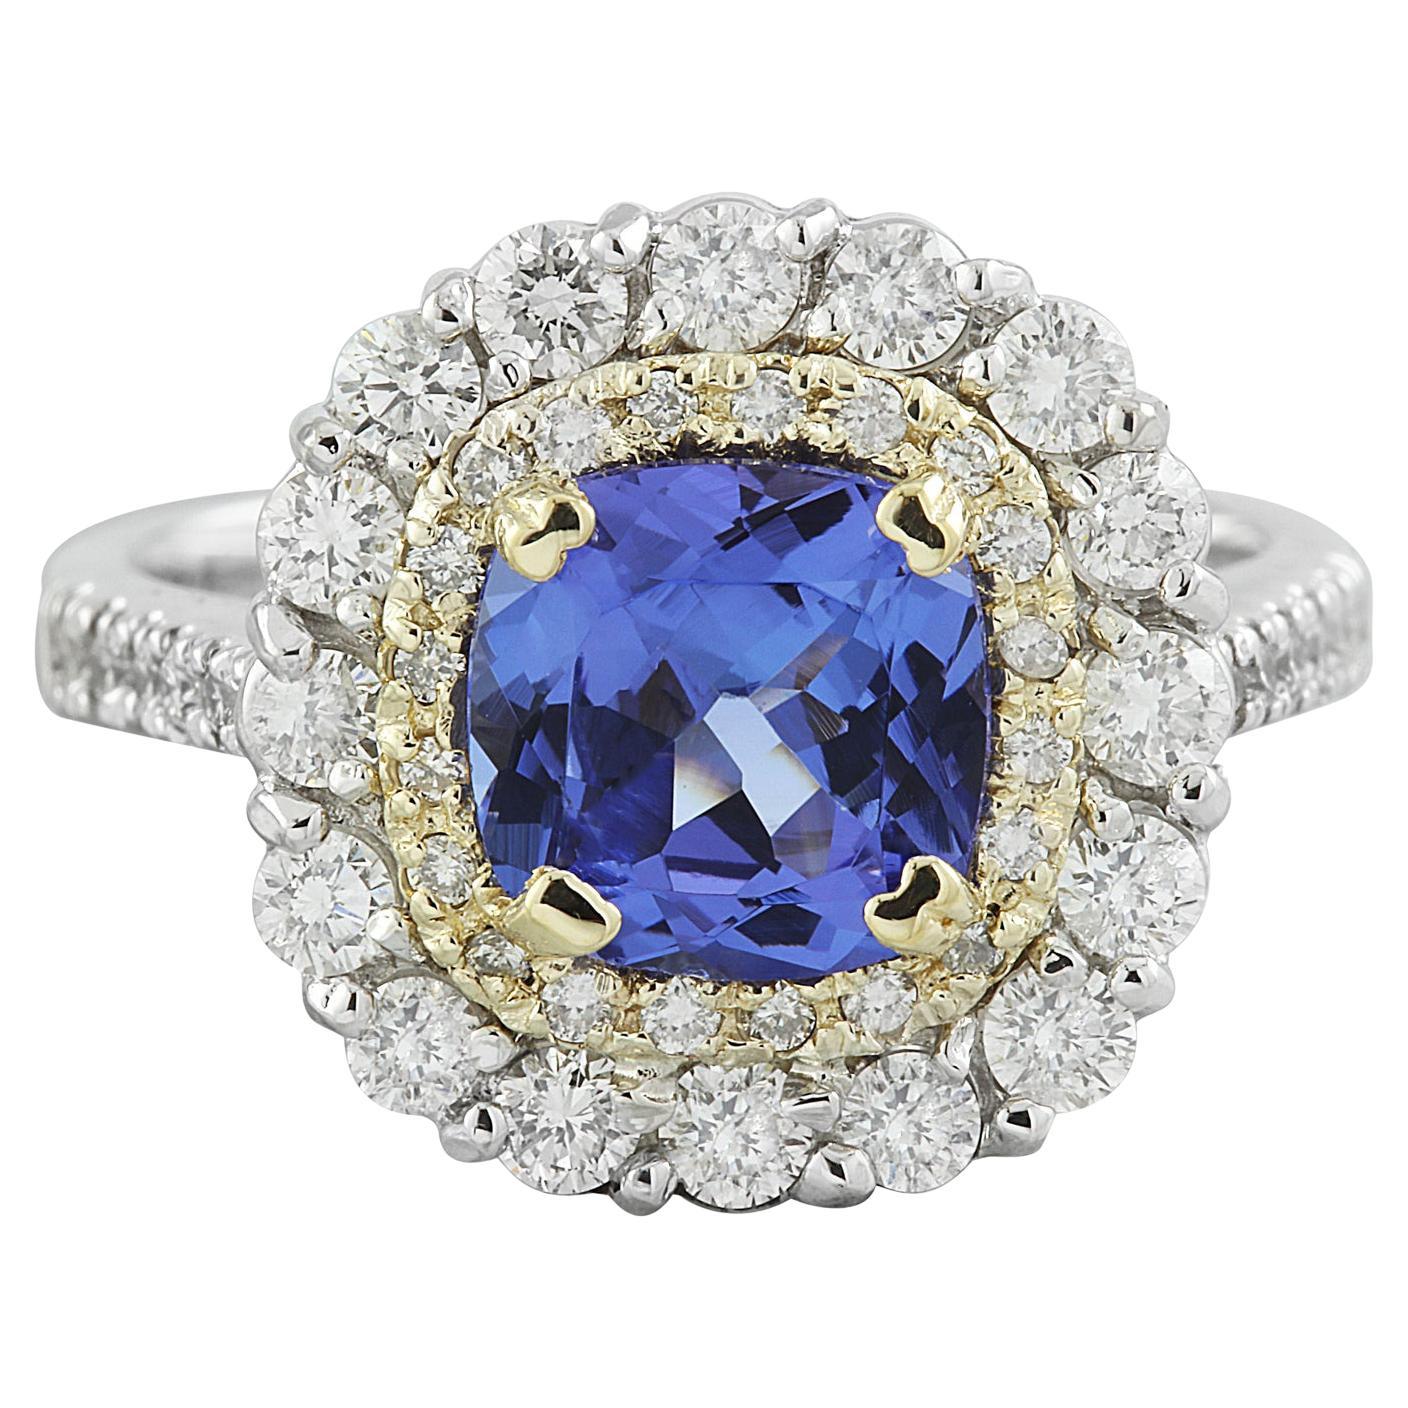 Exquisite Natural Tanzanite Diamond Ring in 14K Two-Tone Gold